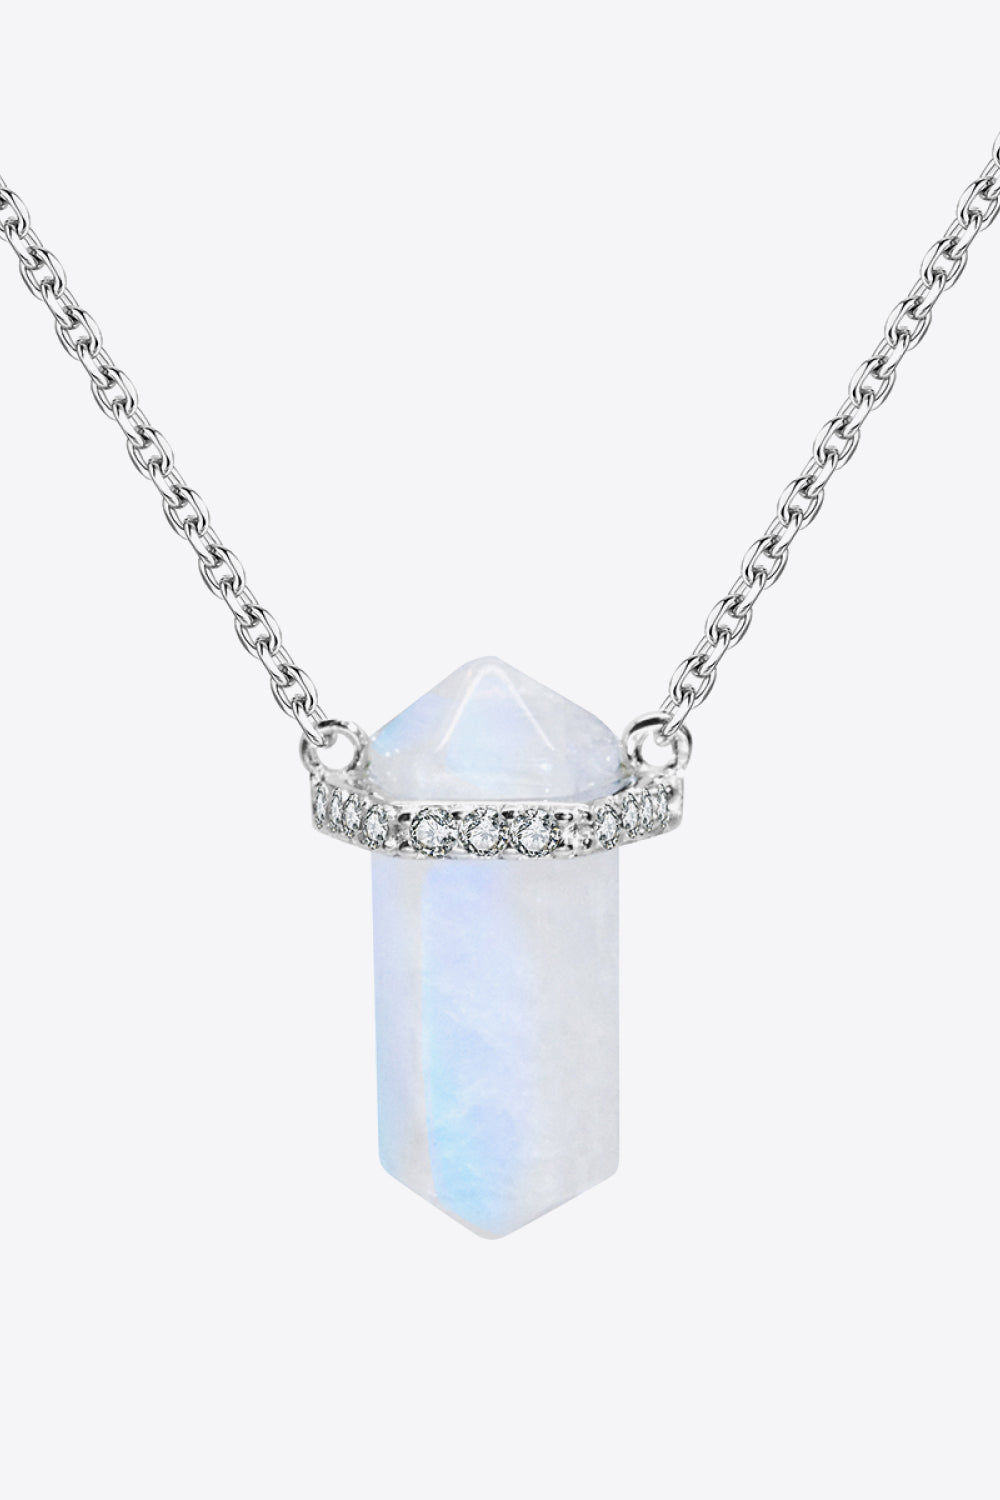 Natural Moonstone Chain-Link Necklace - Tigbul's Fashion